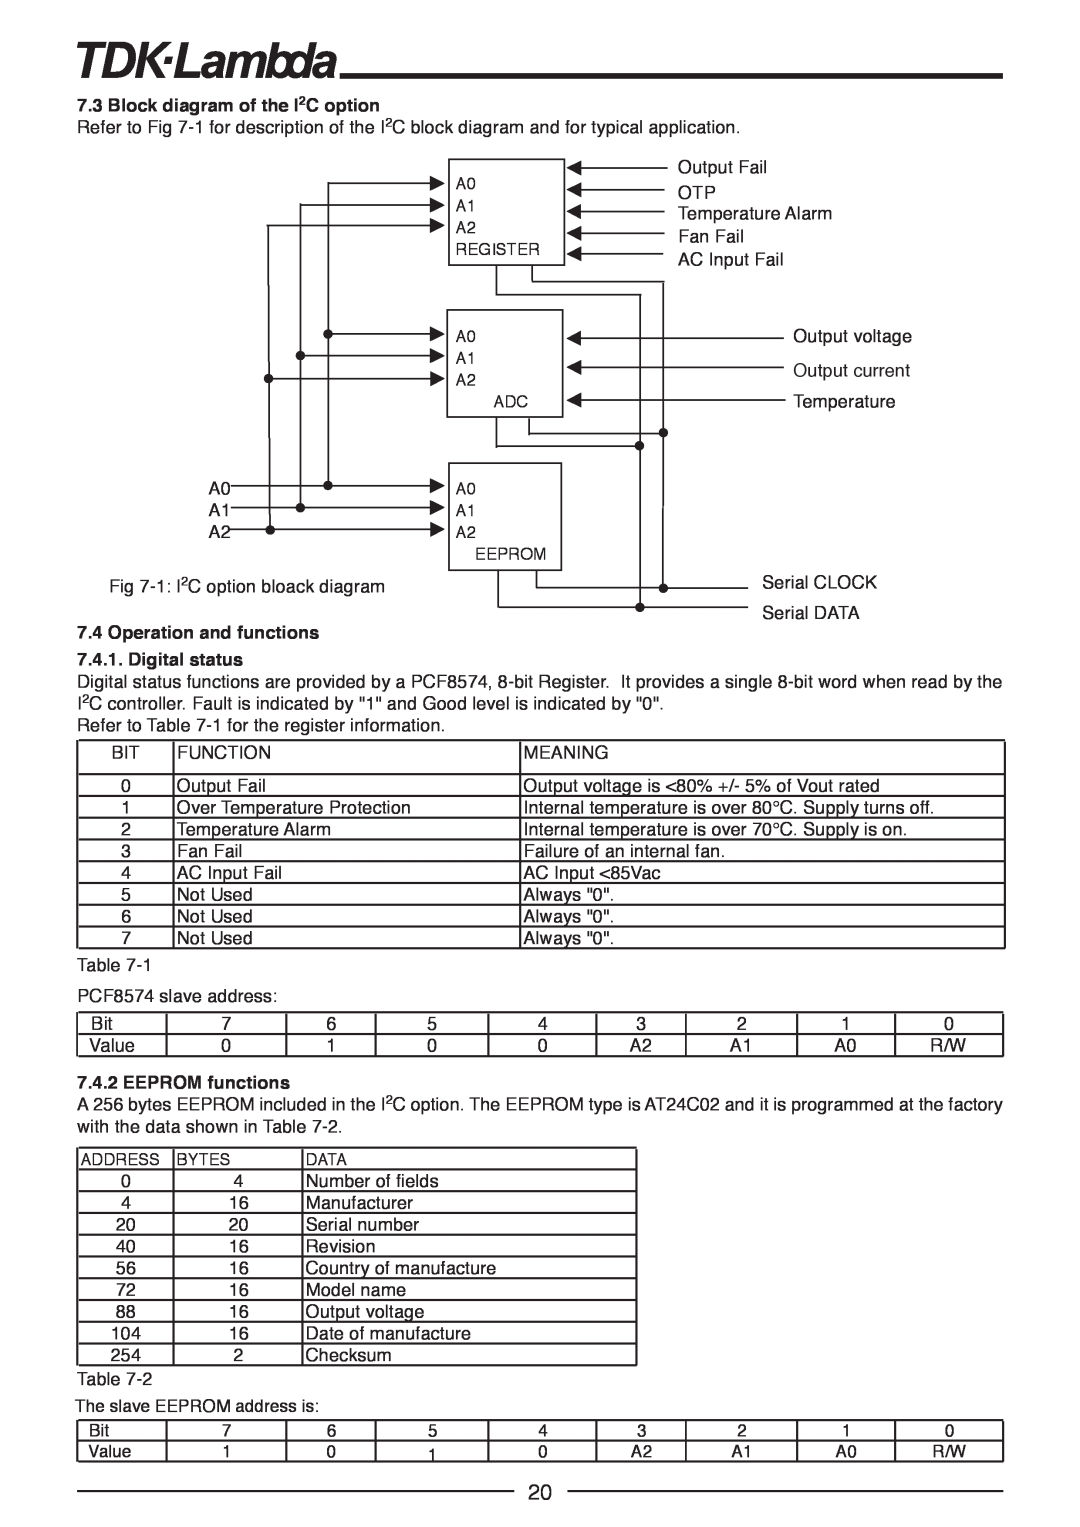 TOA Electronics FPS1000-48, FPS-S1U Value, Block diagram of the I2C option, Operation and functions 7.4.1. Digital status 